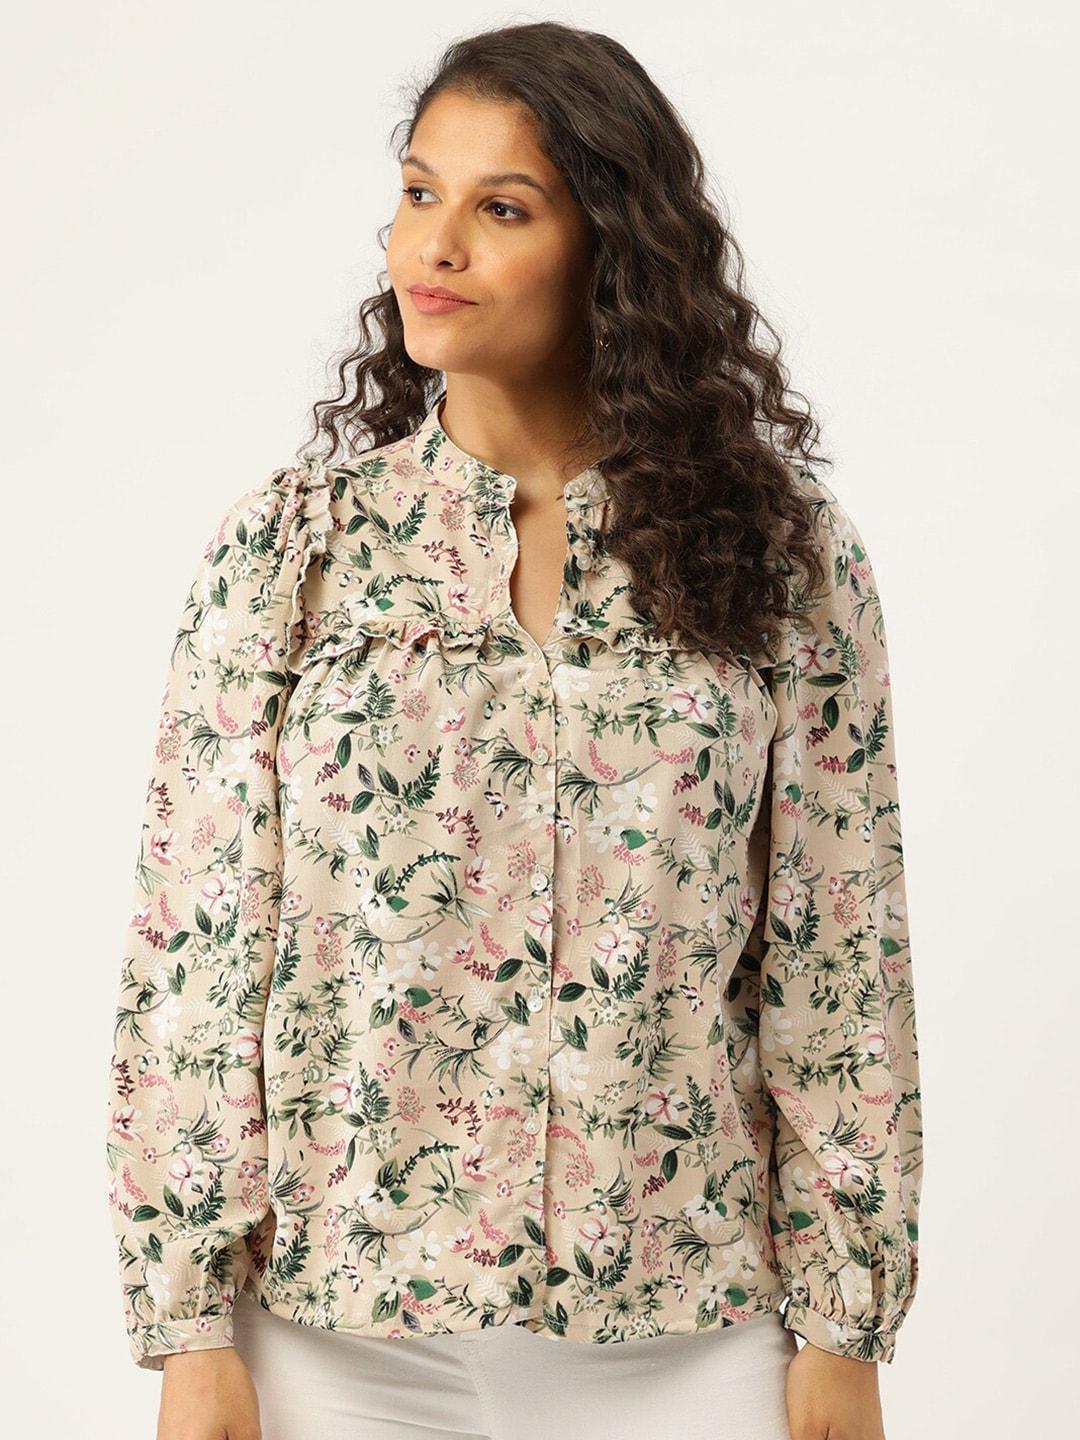 BAESD Floral Printed Shirt Style Crepe Top